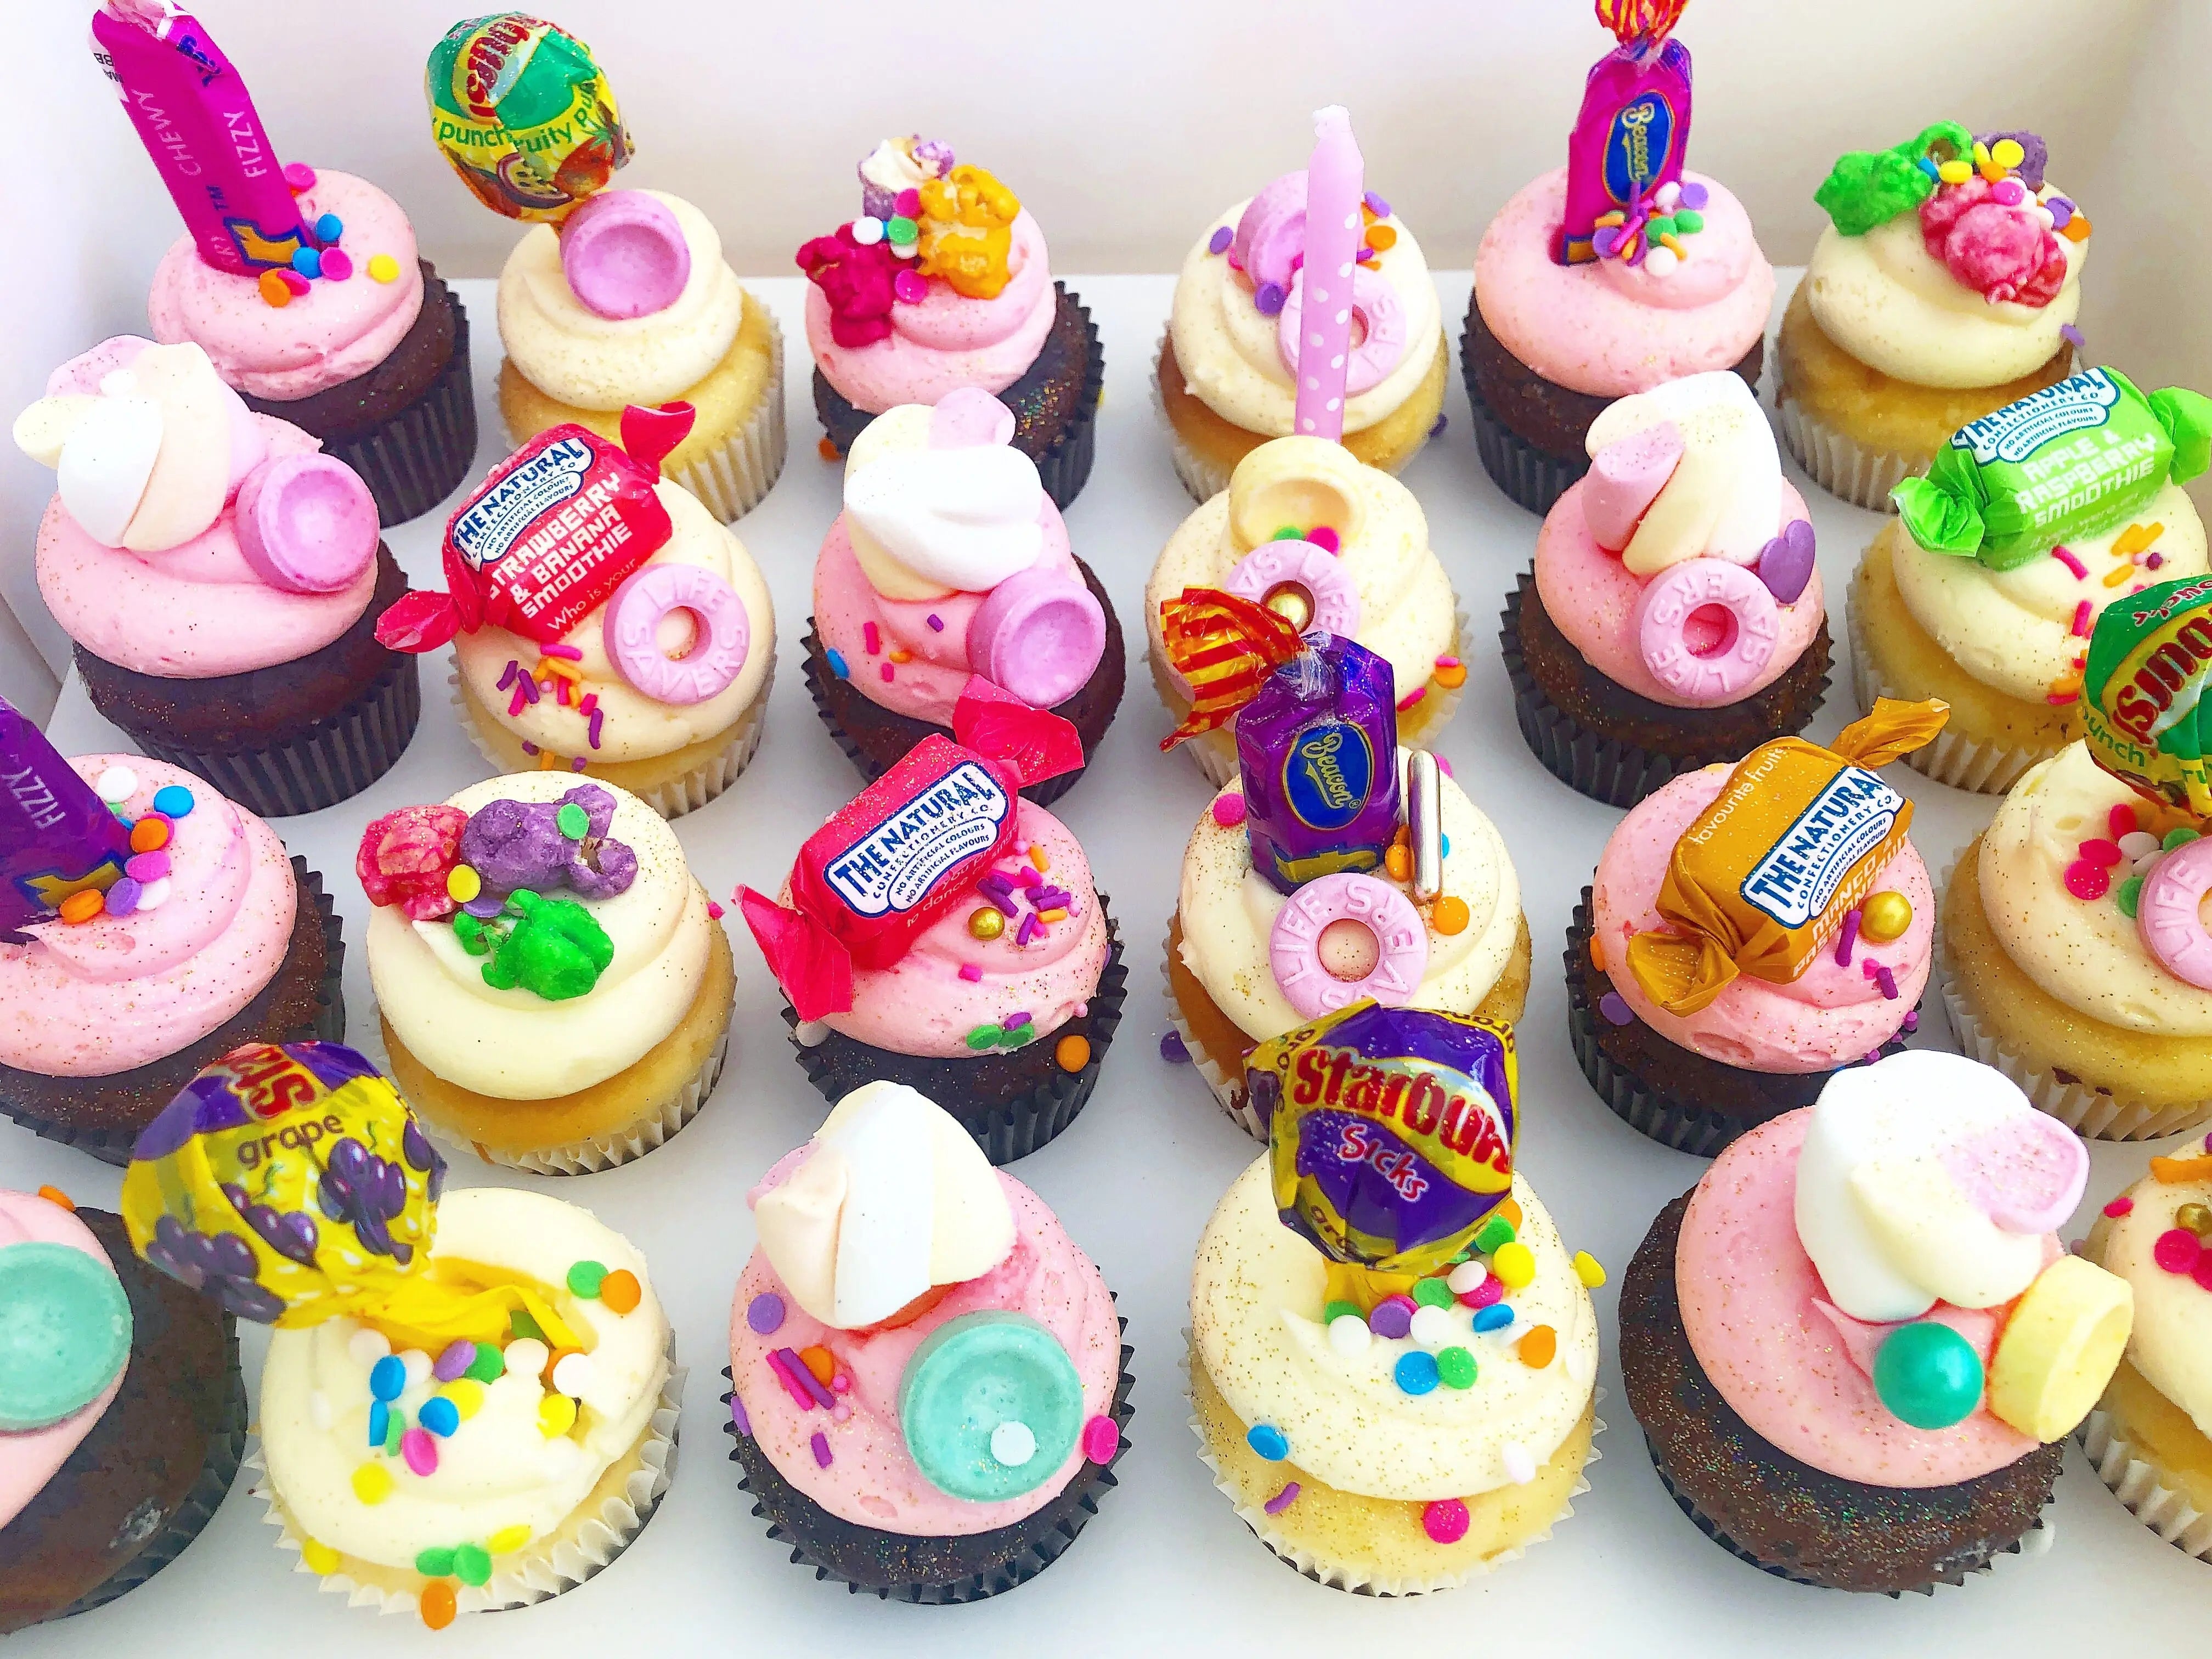 Let’s Party - 24 Mini Cupcakes - Cupcake Occasion